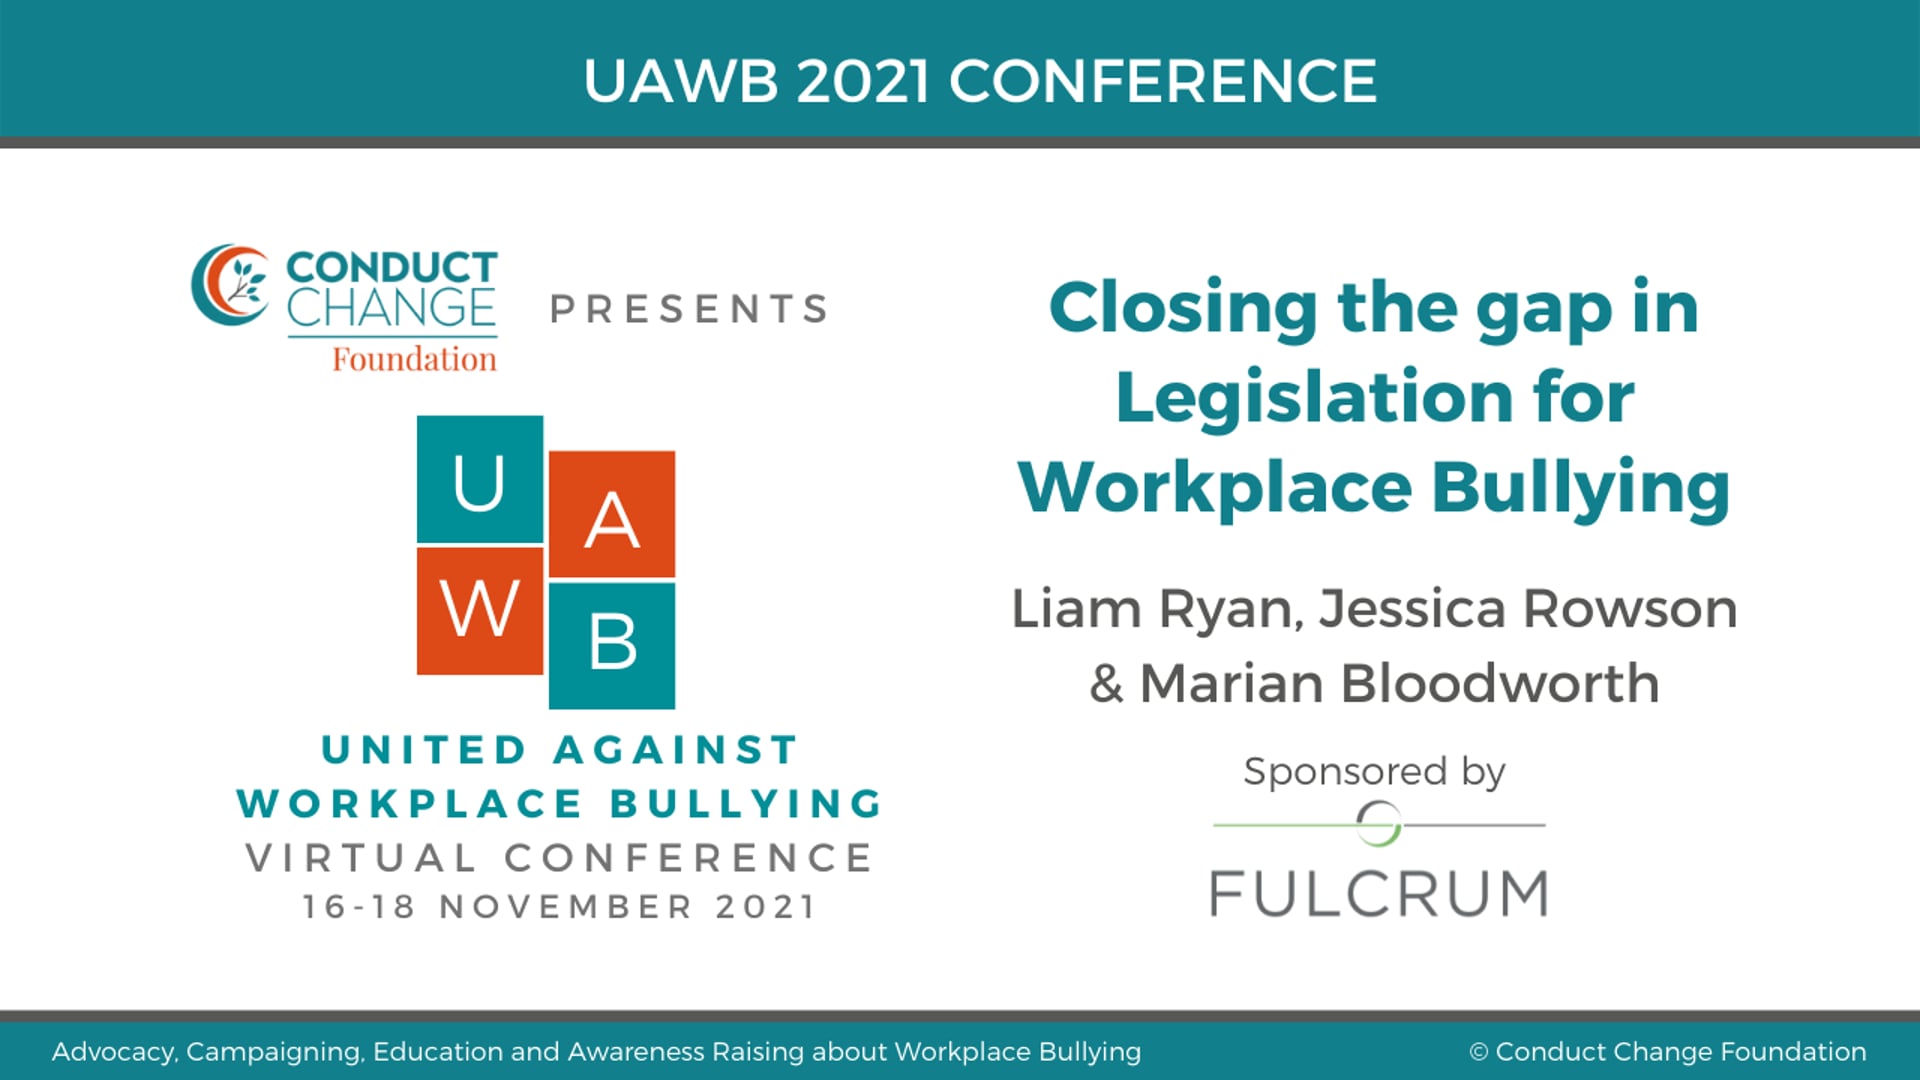 Closing the gap in legislation for workplace bullying